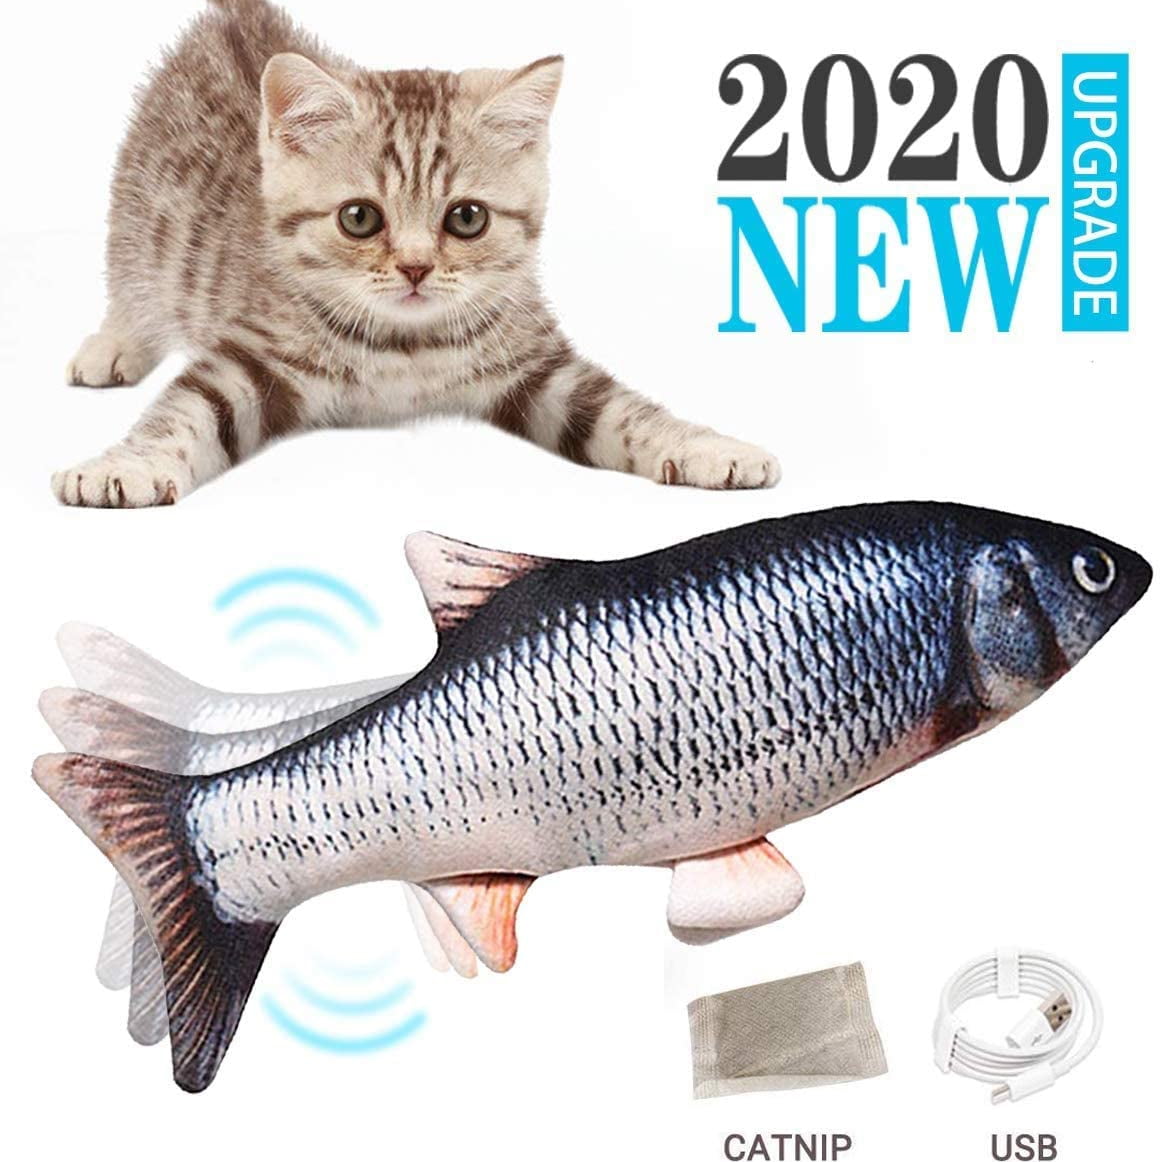 Plush Interactive Cat Toys Chewing and Kicking 11 inch Realistic Wiggle Fish Catnip Toys CDIYTOOL Electric Catnip Fish Toys for Cats Perfect for Biting Fun Toy for Cat Exercise